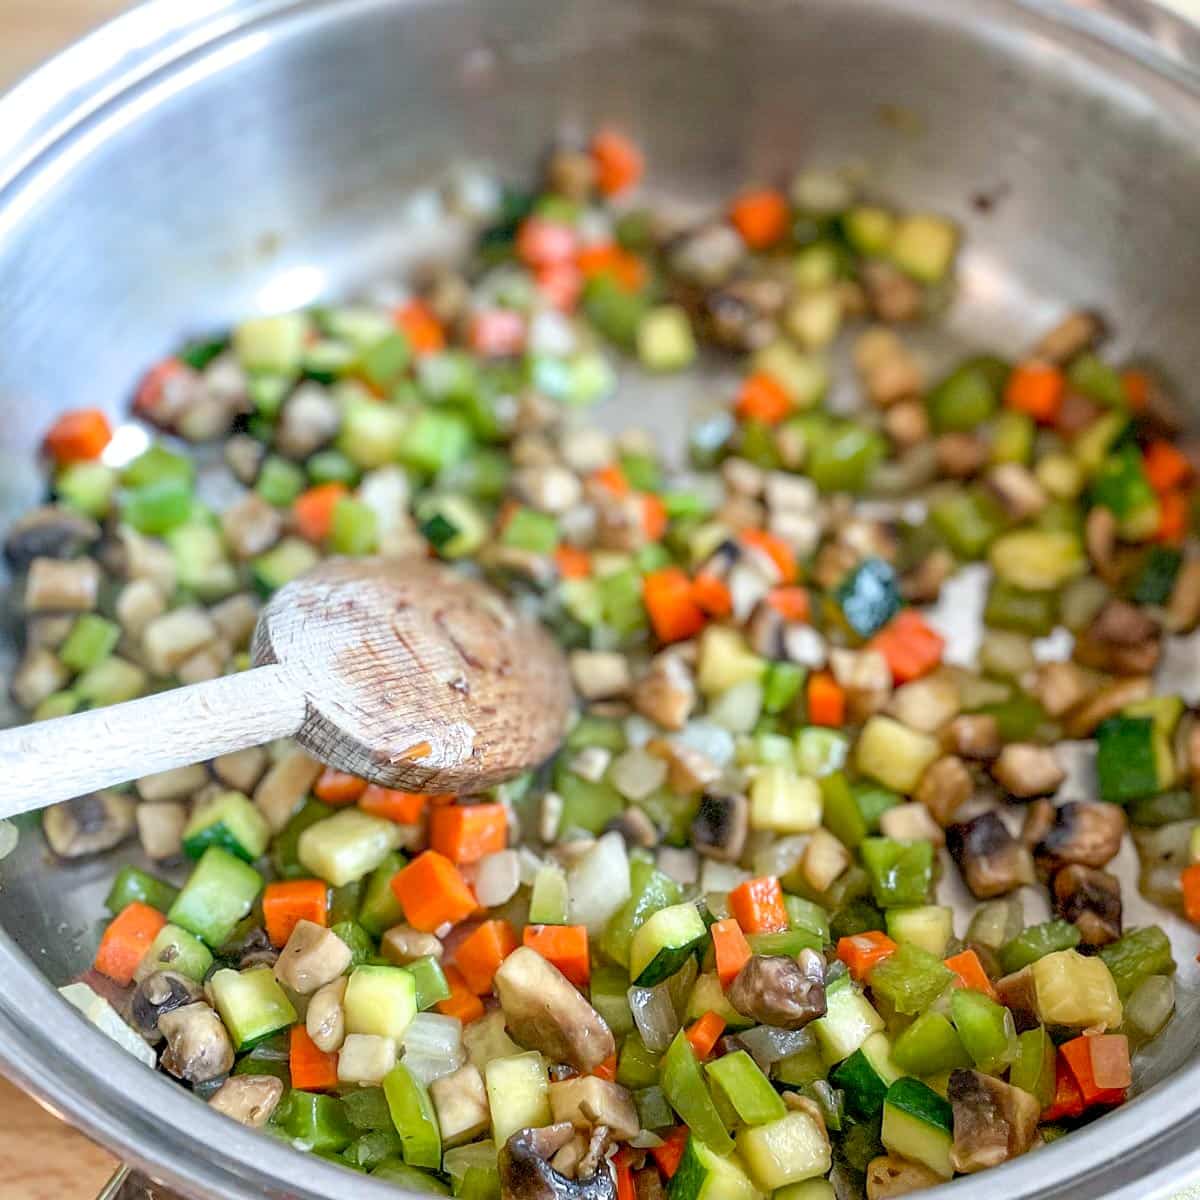 The diced vegetables are sweated in a stainless steel pan.